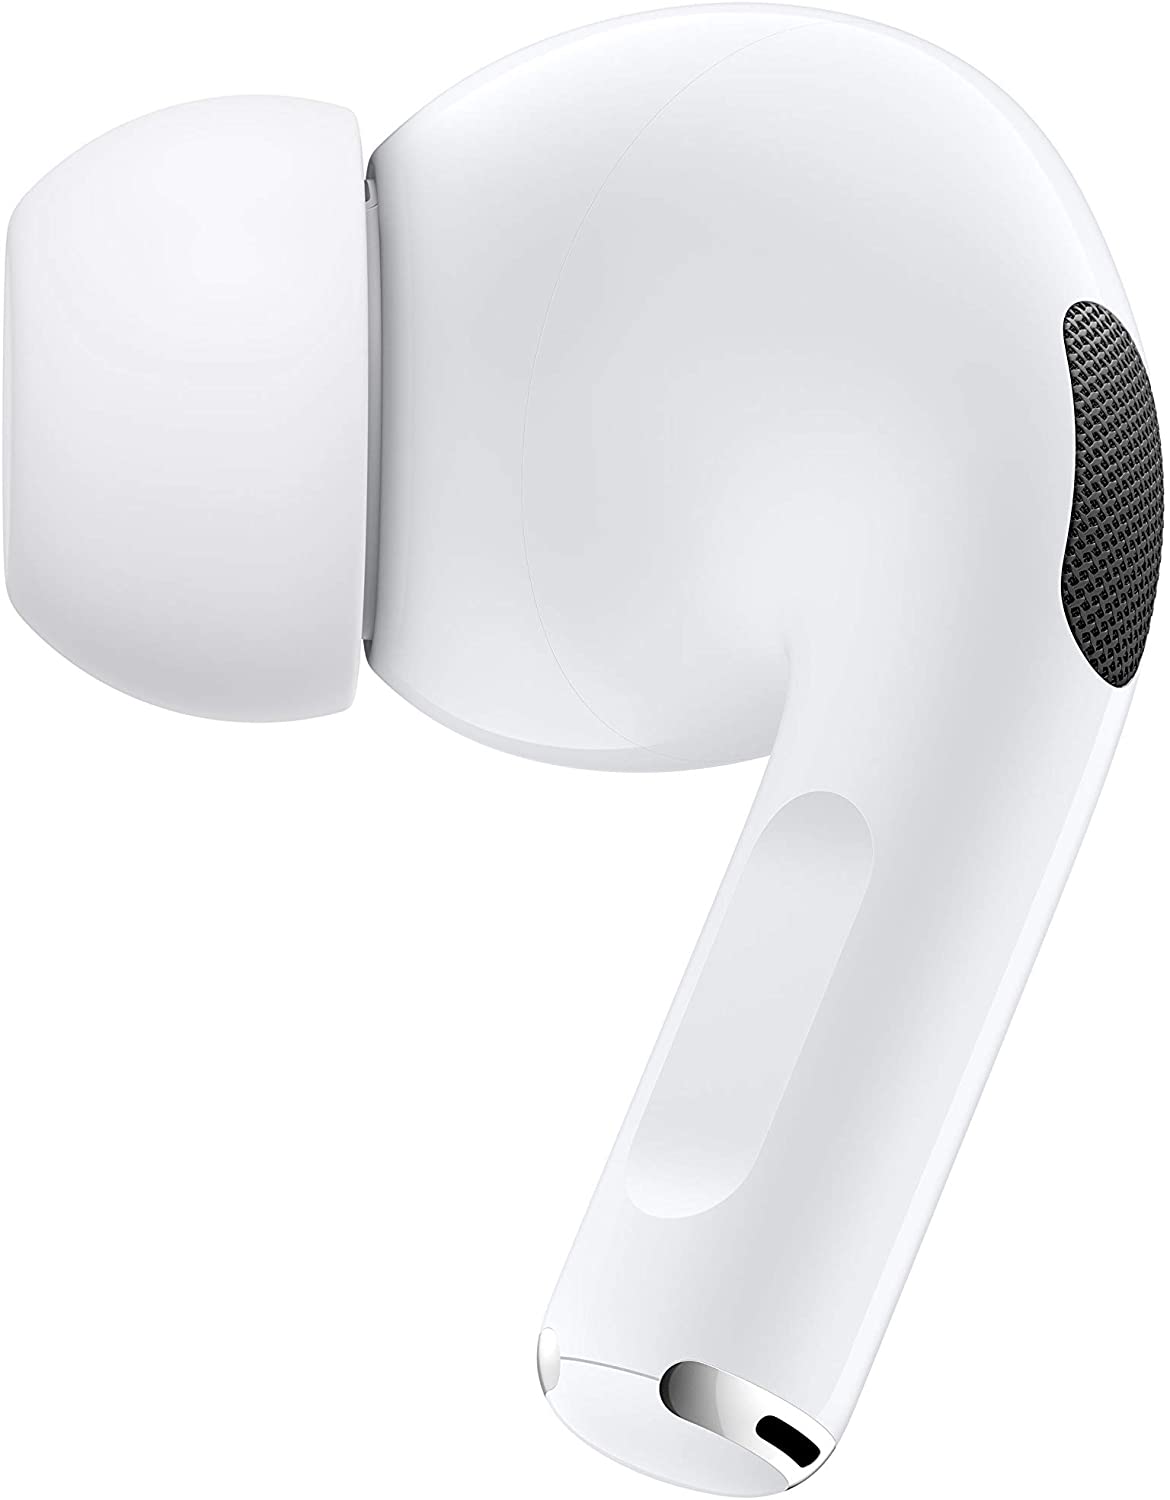 Apple Airpods Pro with MagSafe Charging Case